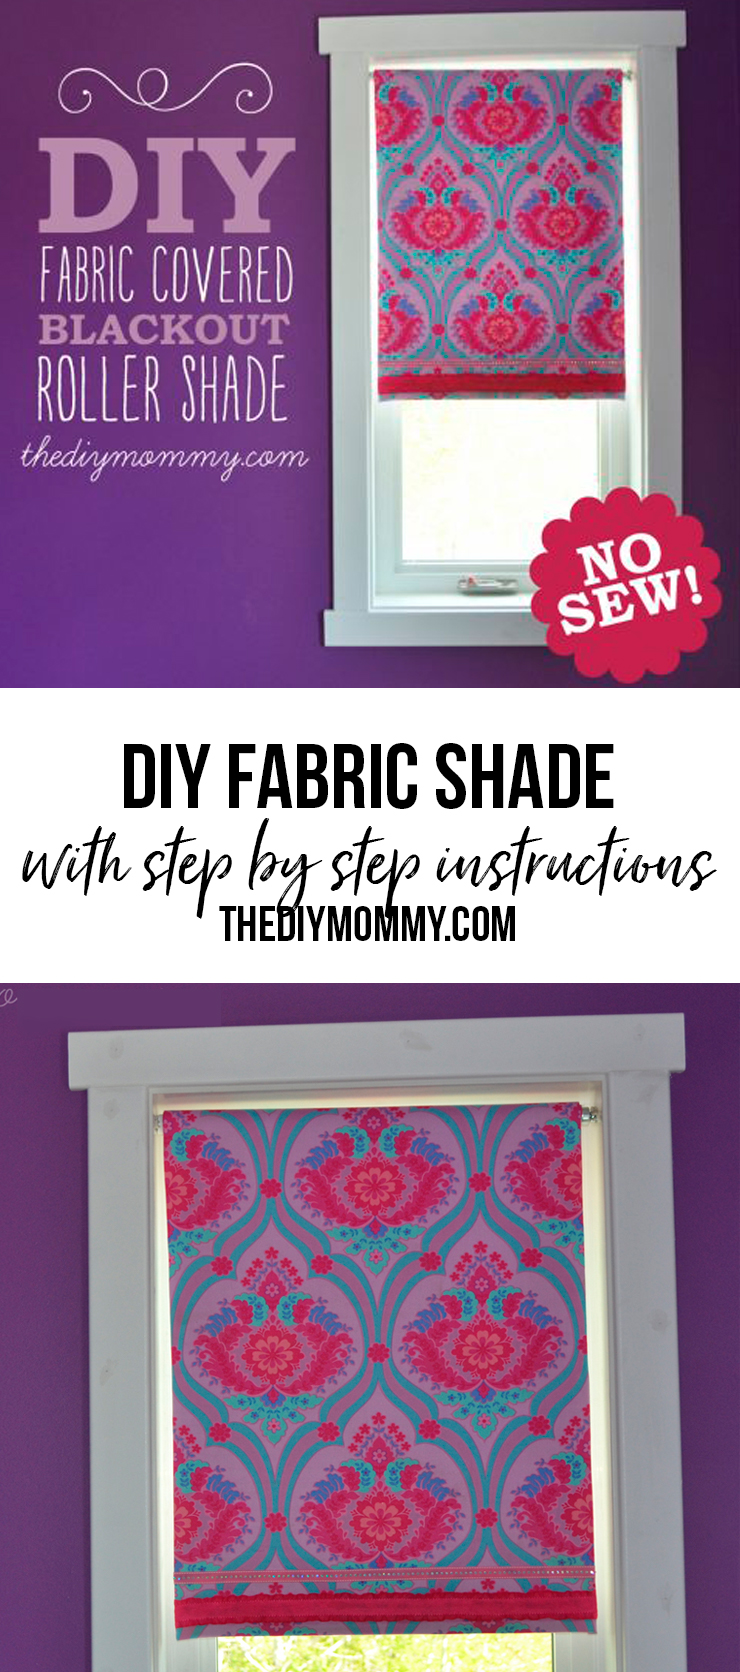 Make A No Sew Fabric Covered Roller Shade The Diy Mommy